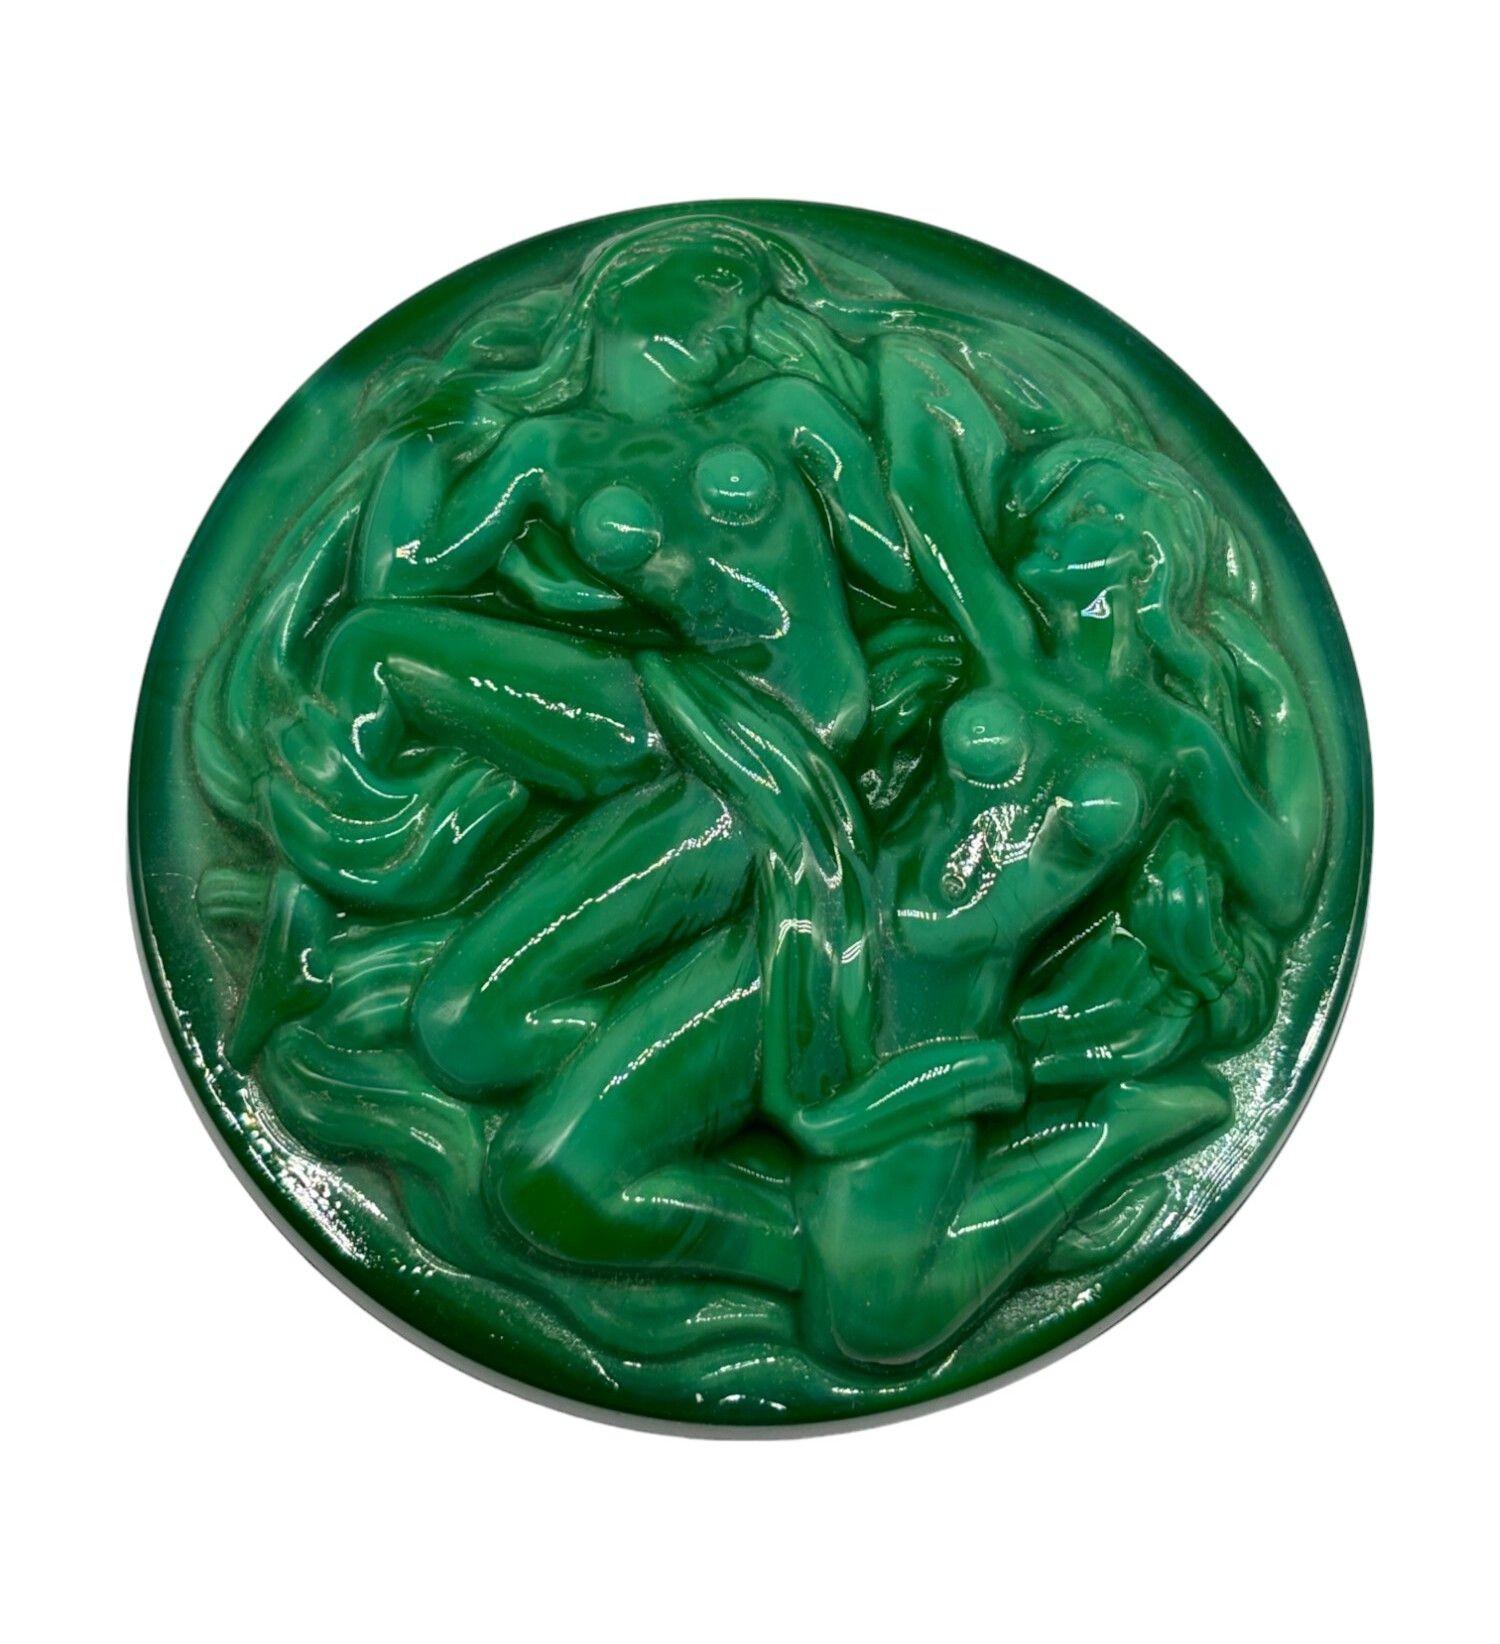 Heinrich Hoffmann (1875-1938) jewelry/powder Box Bombonniere With Bacchantes Naiads Glass 1930 Art Deco Bombonniere with bacchantes in pressed molded green glass by Heinrich Hoffmann, famous Czech glass craftsman at the beginning of the 20th